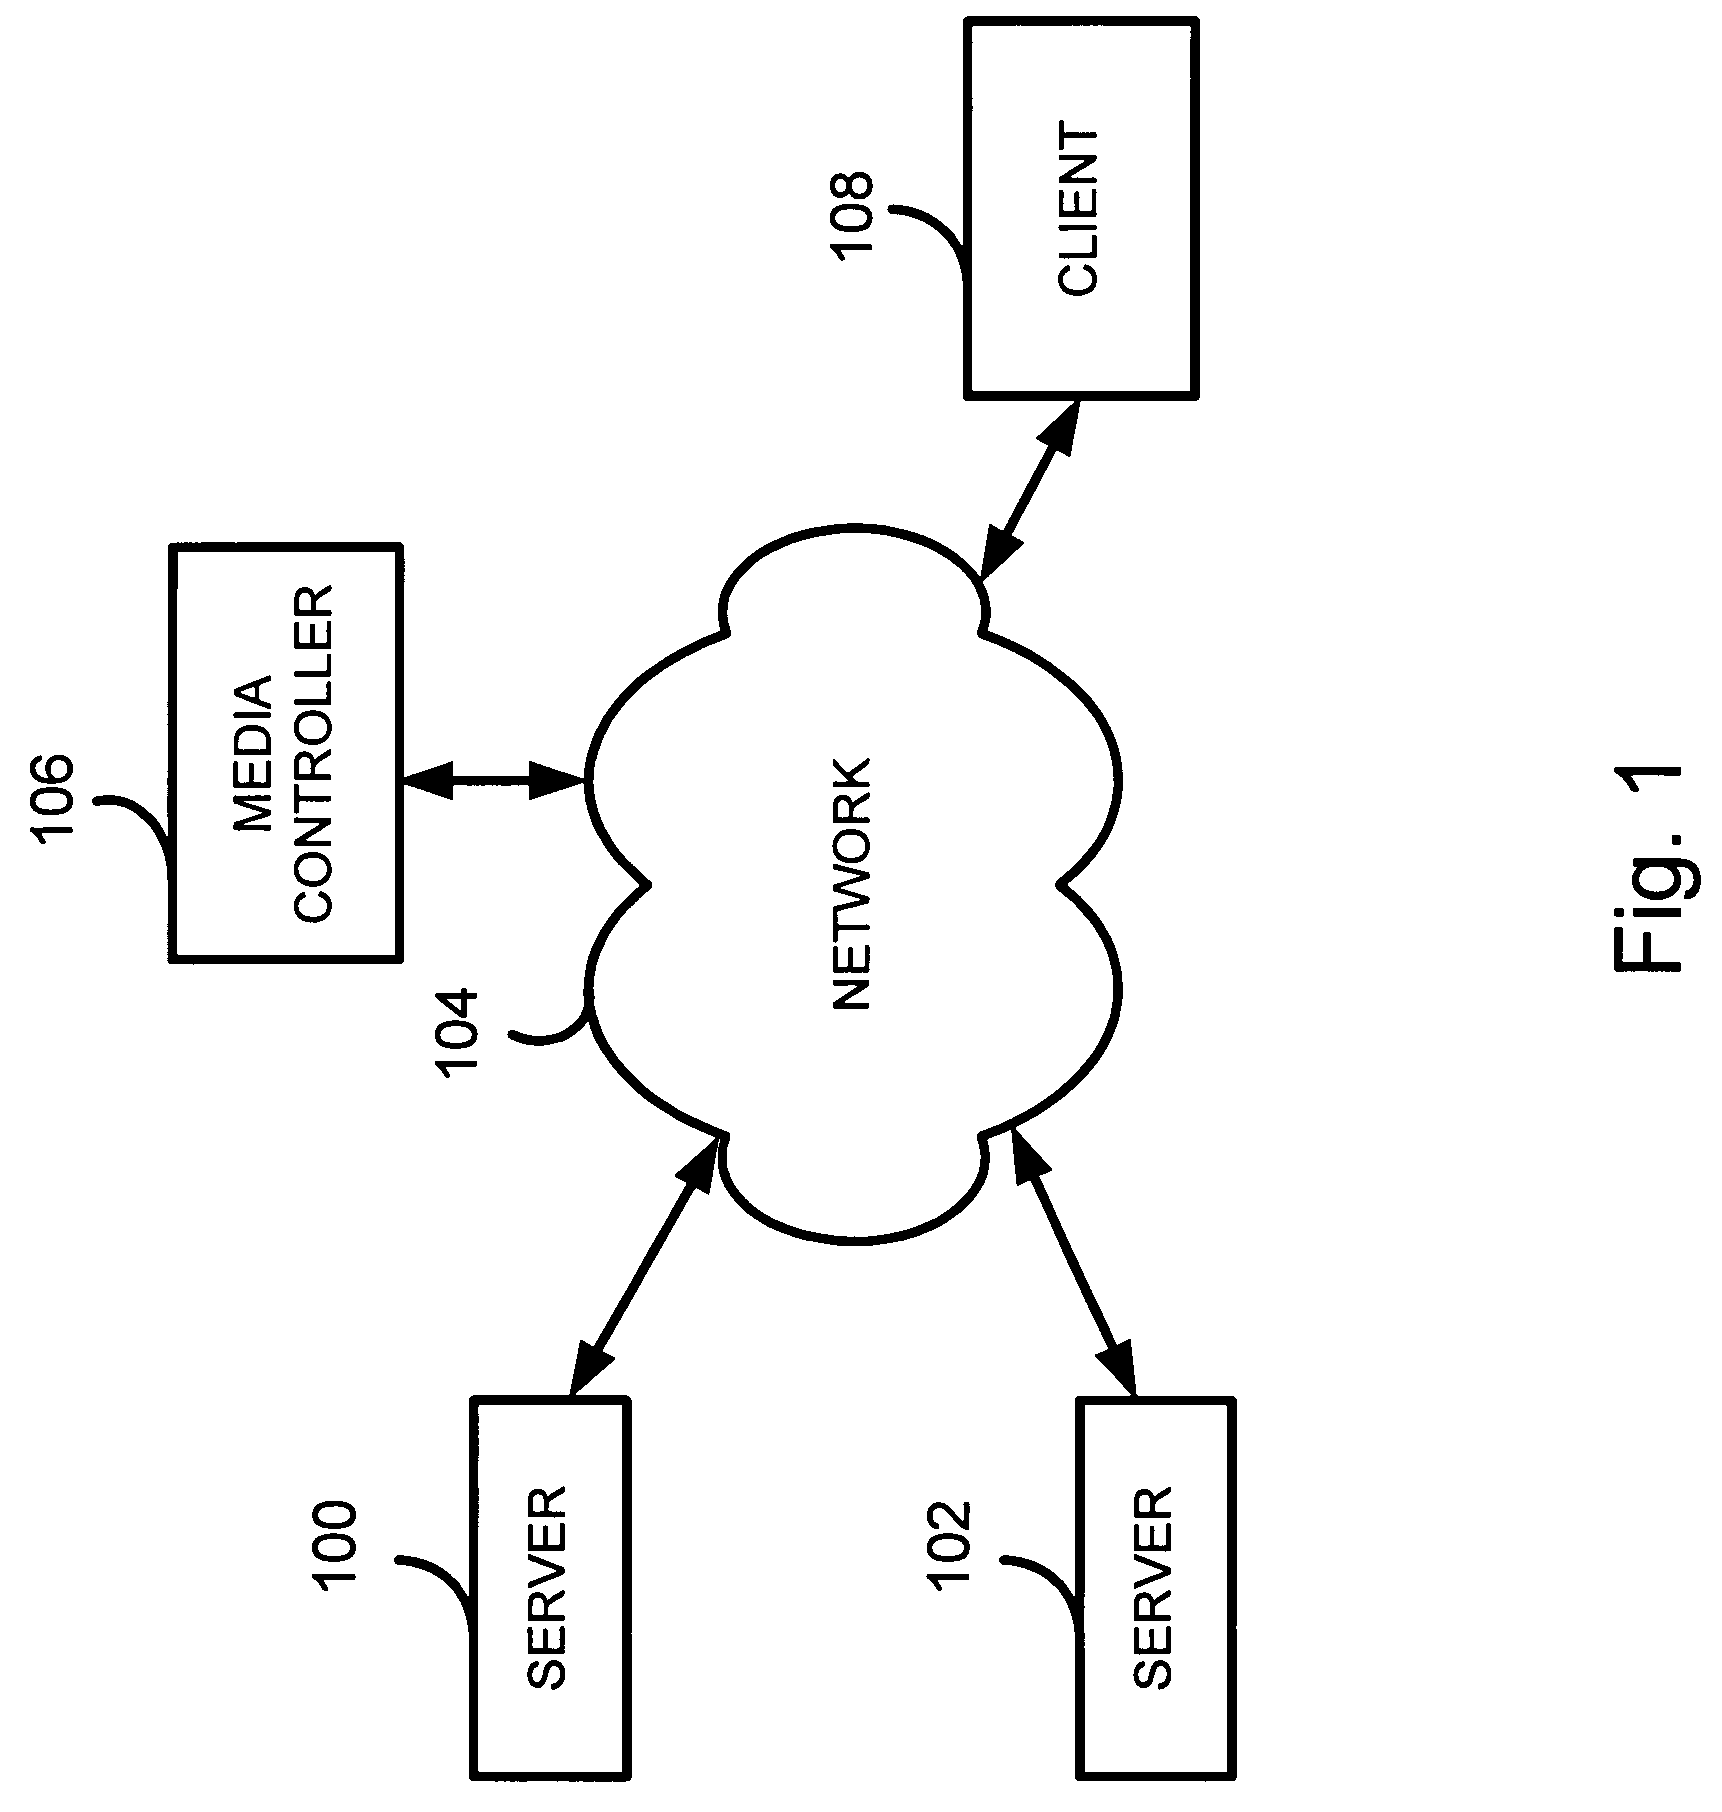 Method for redirection of web streaming clients using lightweight available bandwidth measurement from a plurality of servers